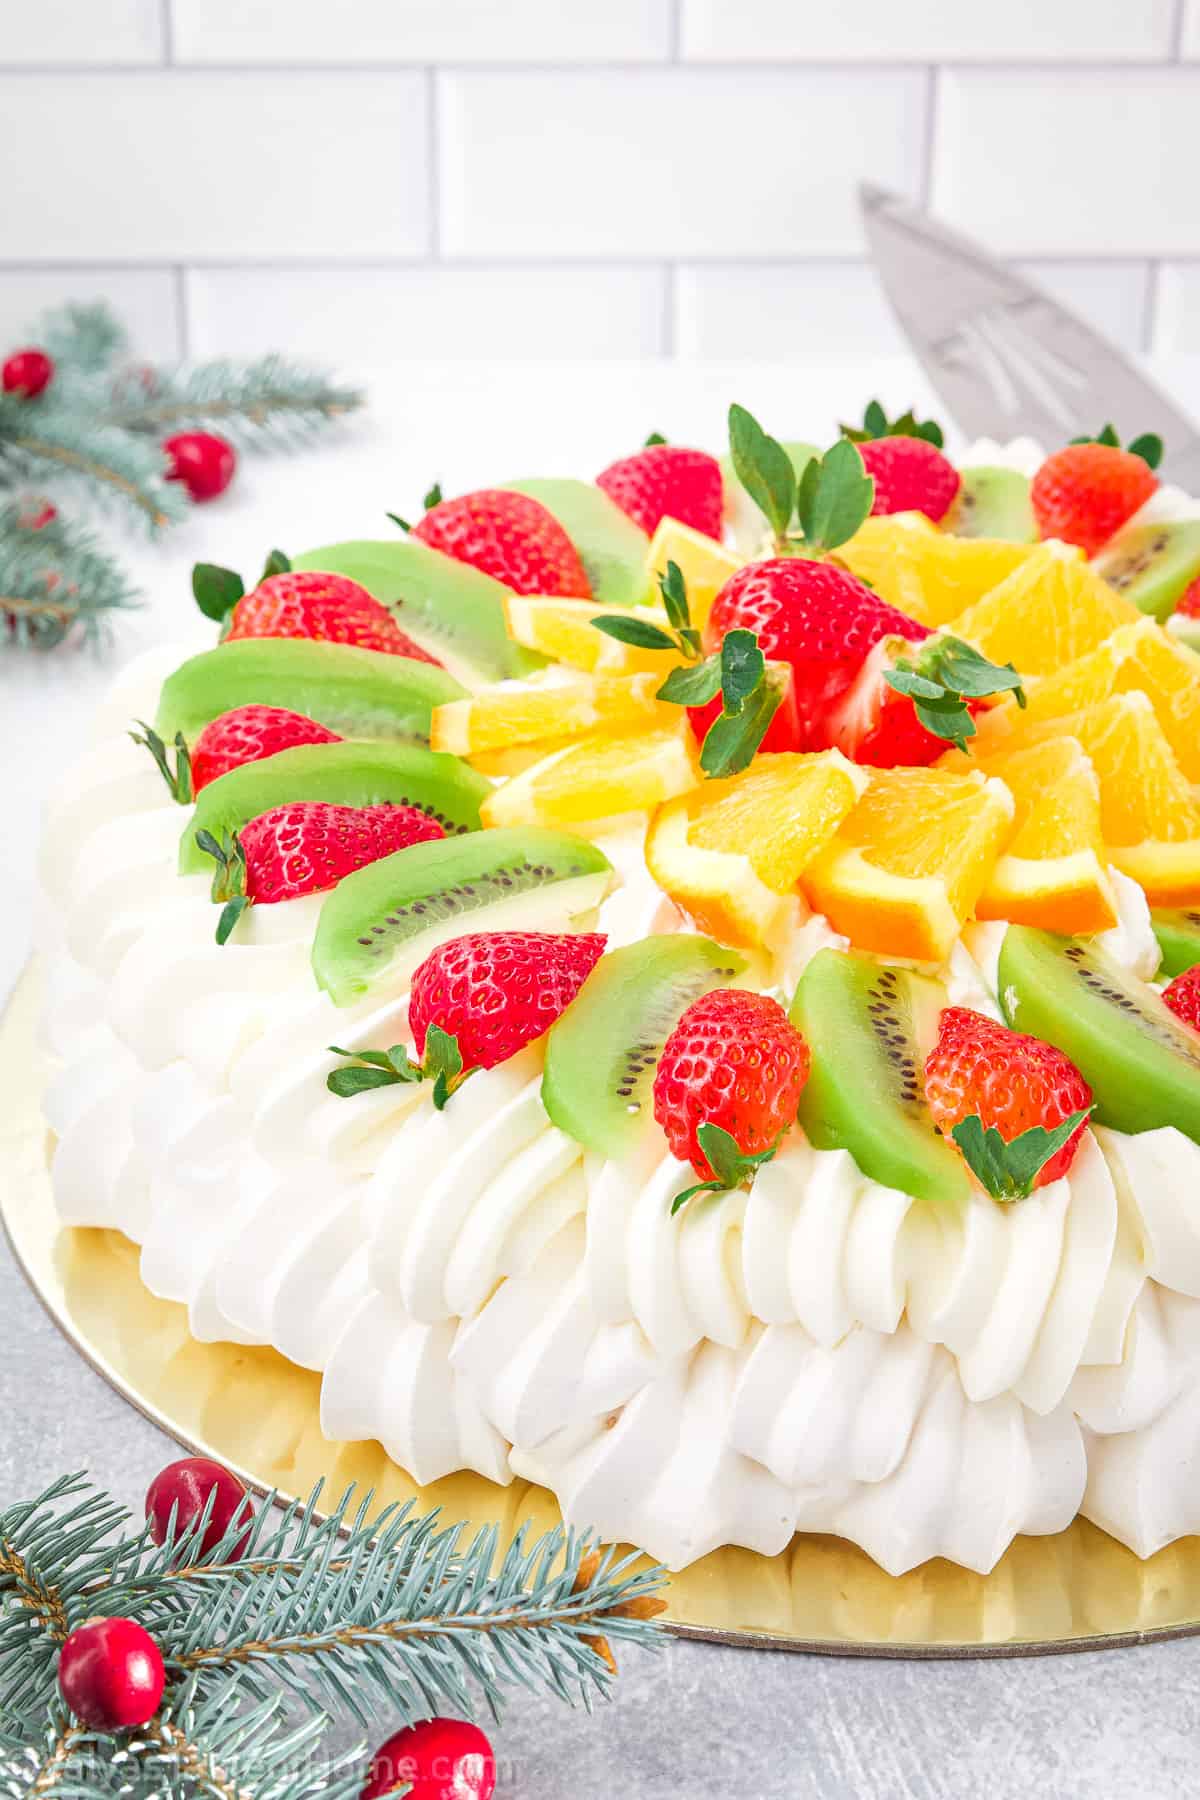 Pavlova cake is a dessert that is as delightful to the eyes as it is to the taste buds.